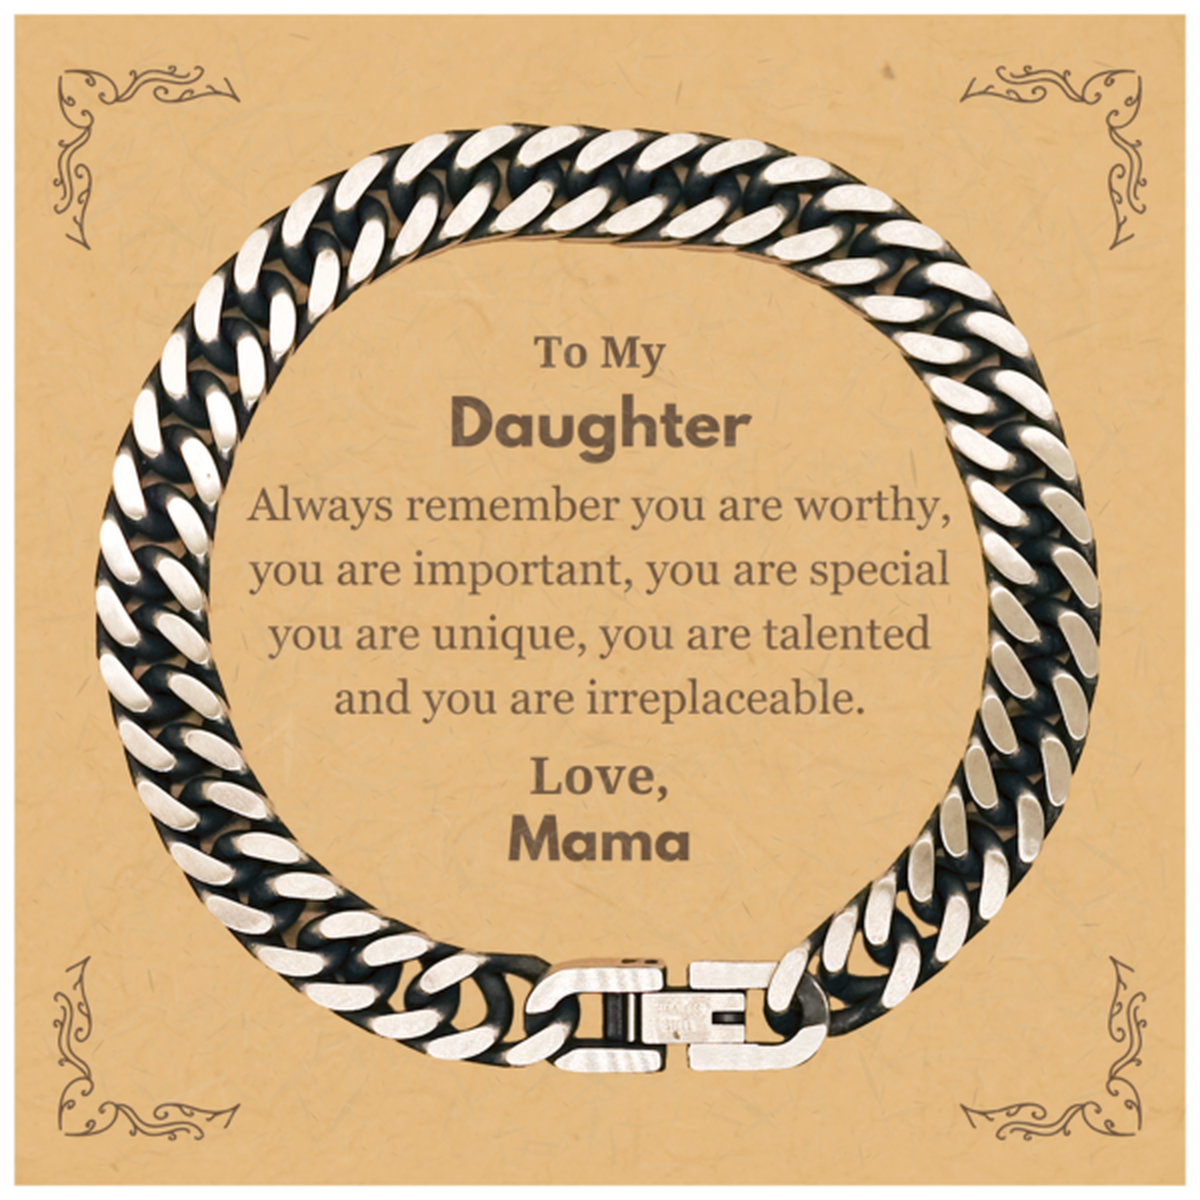 Daughter Birthday Gifts from Mama, Inspirational Cuban Link Chain Bracelet for Daughter Christmas Graduation Gifts for Daughter Always remember you are worthy, you are important. Love, Mama